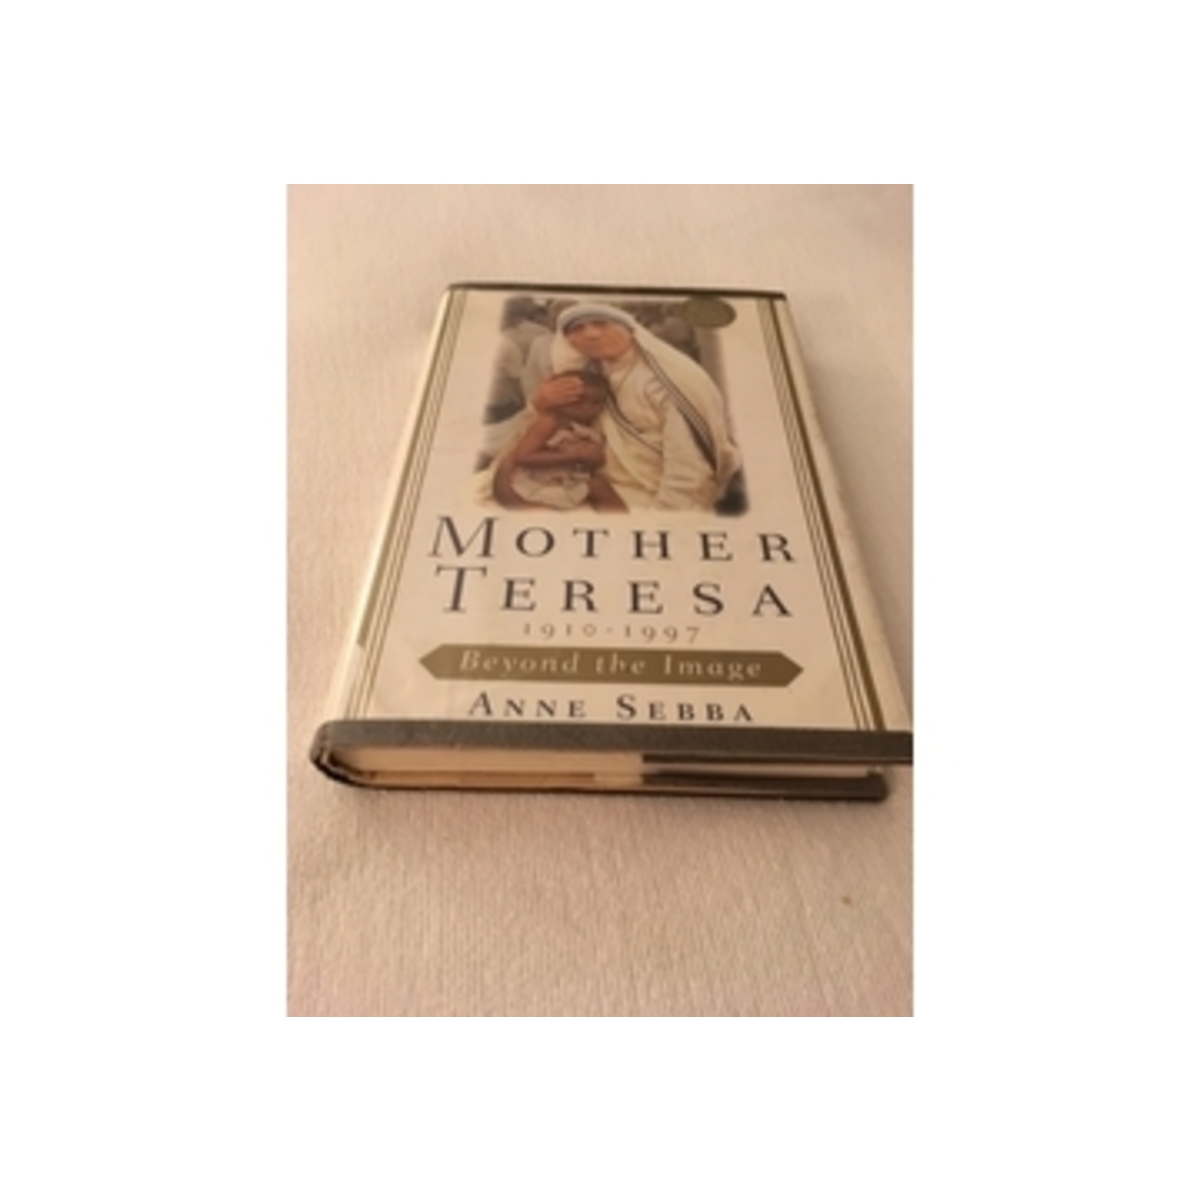 Mother Theresa a Biography by Ann Sabba Available at hebookchateau.com